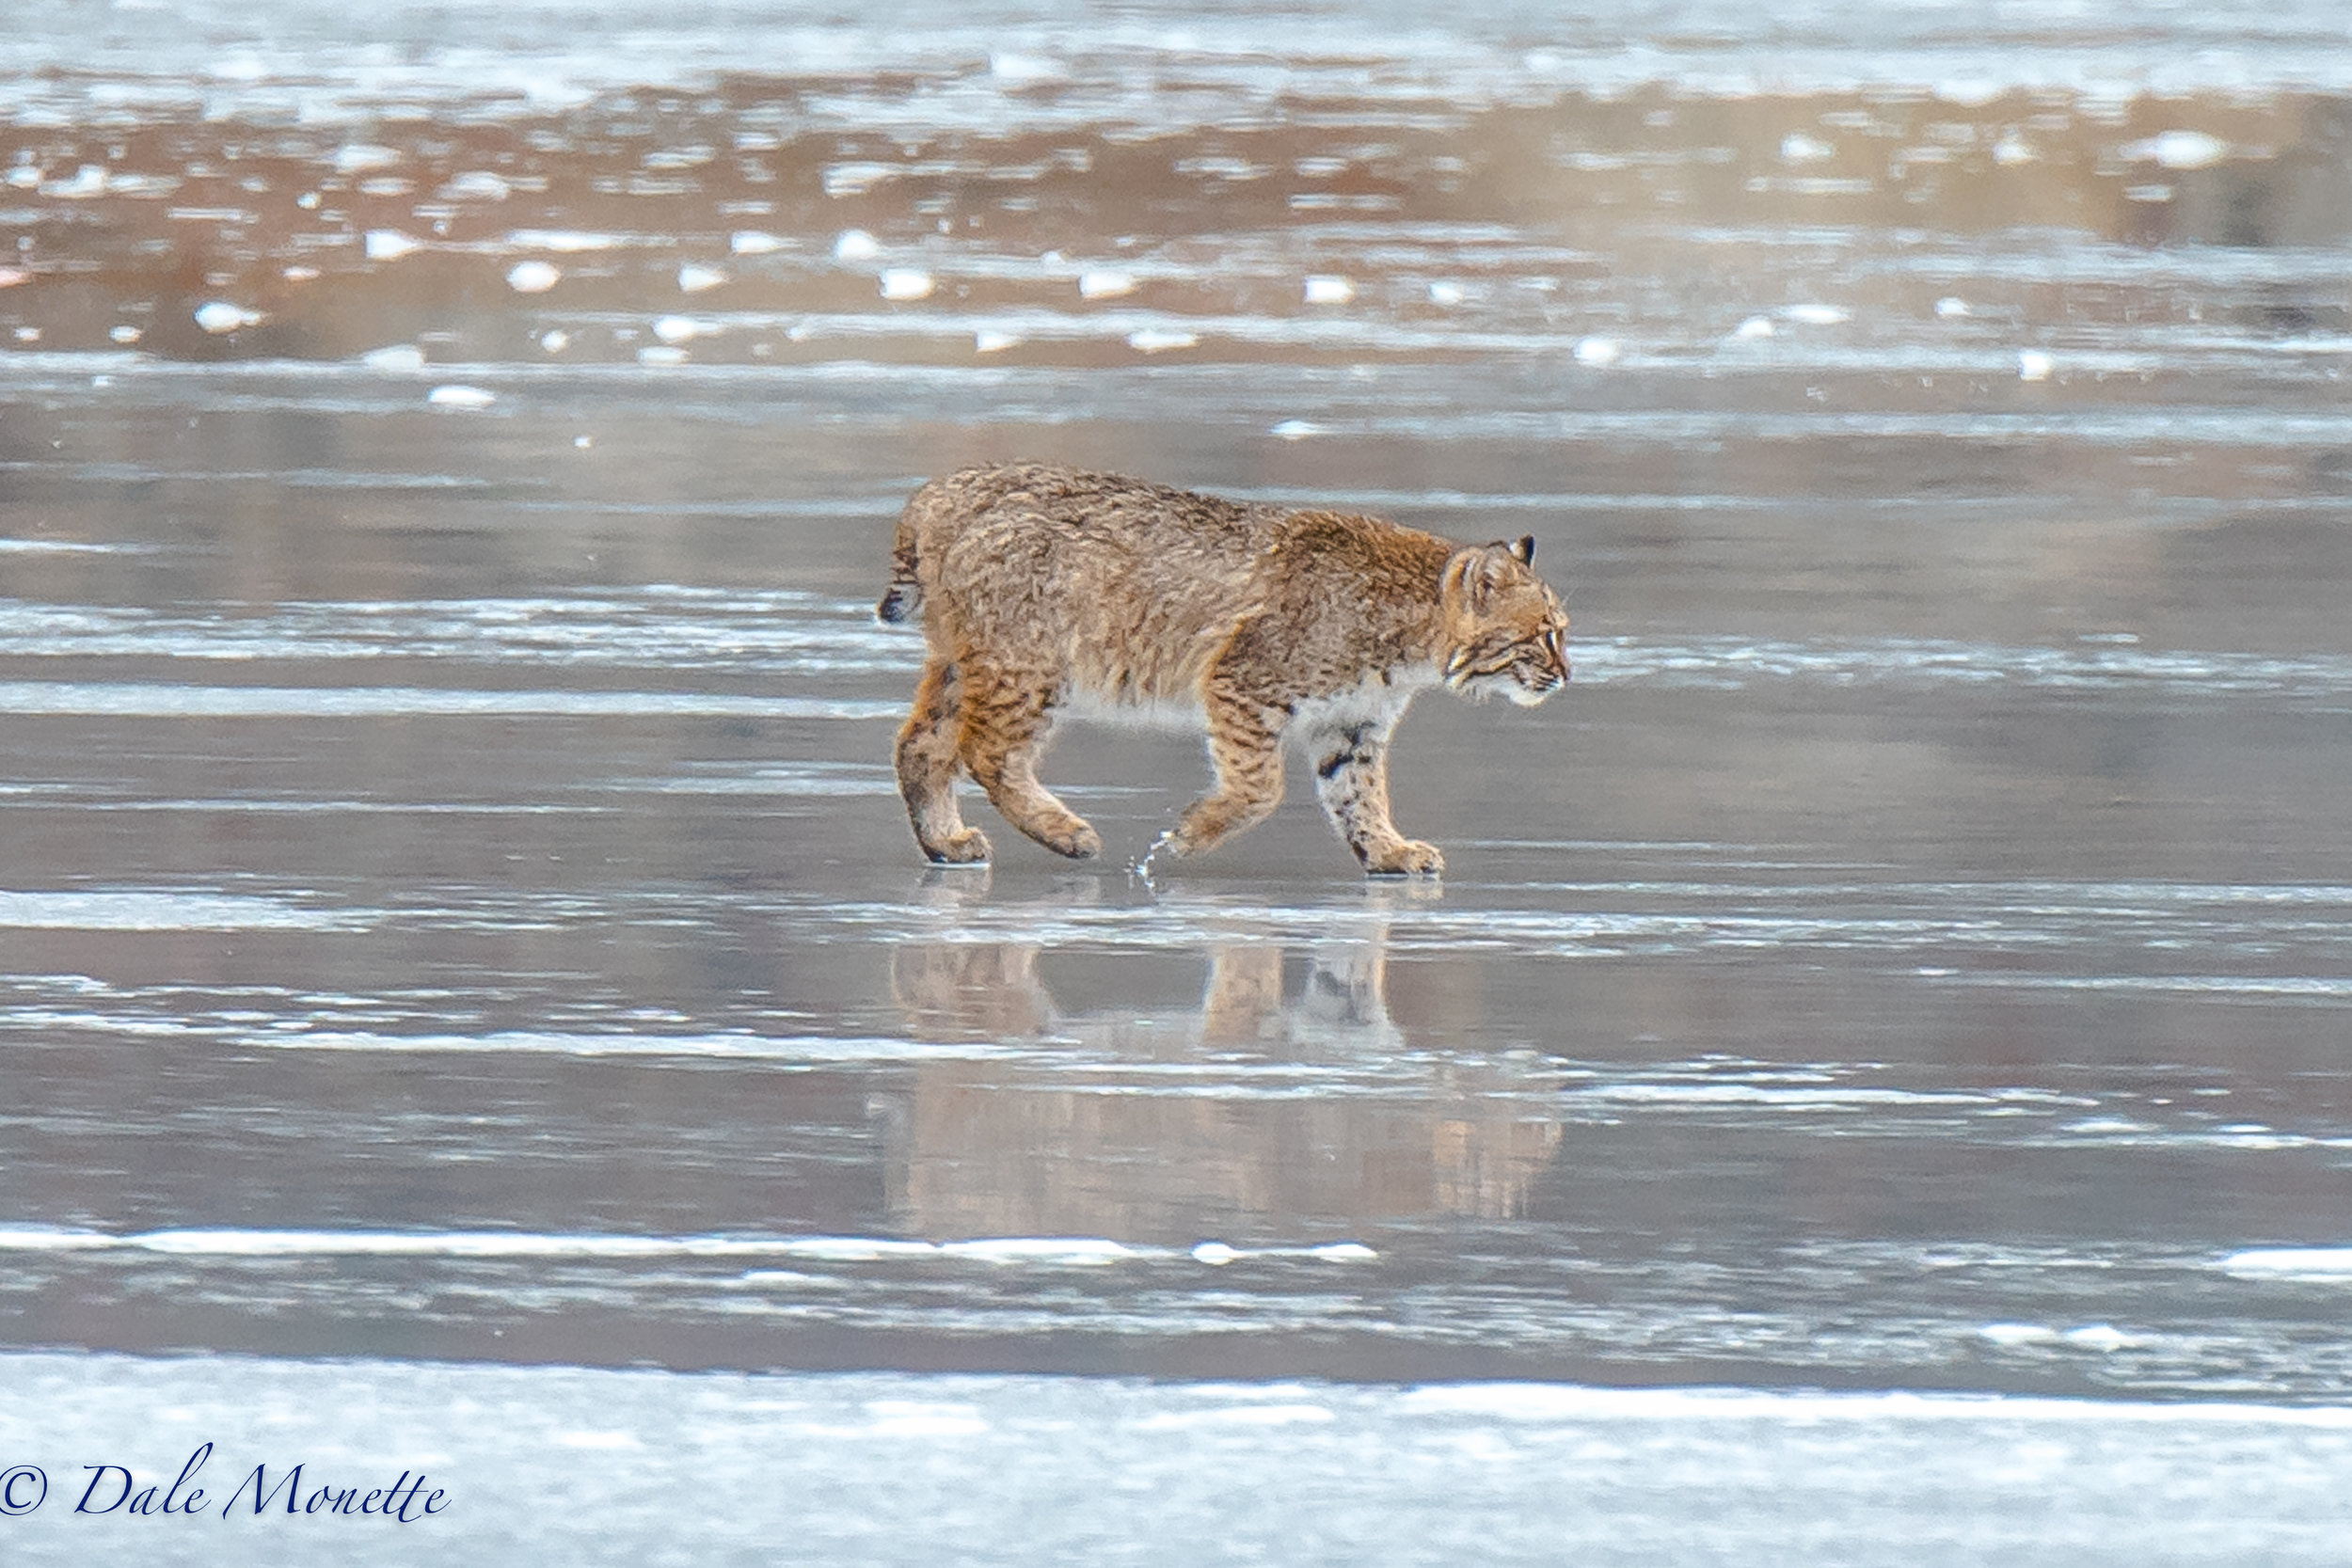   The same bobcat wandering around the ice taking a break from feeding. &nbsp;A beautiful cat to say the least! &nbsp;1/4/17  